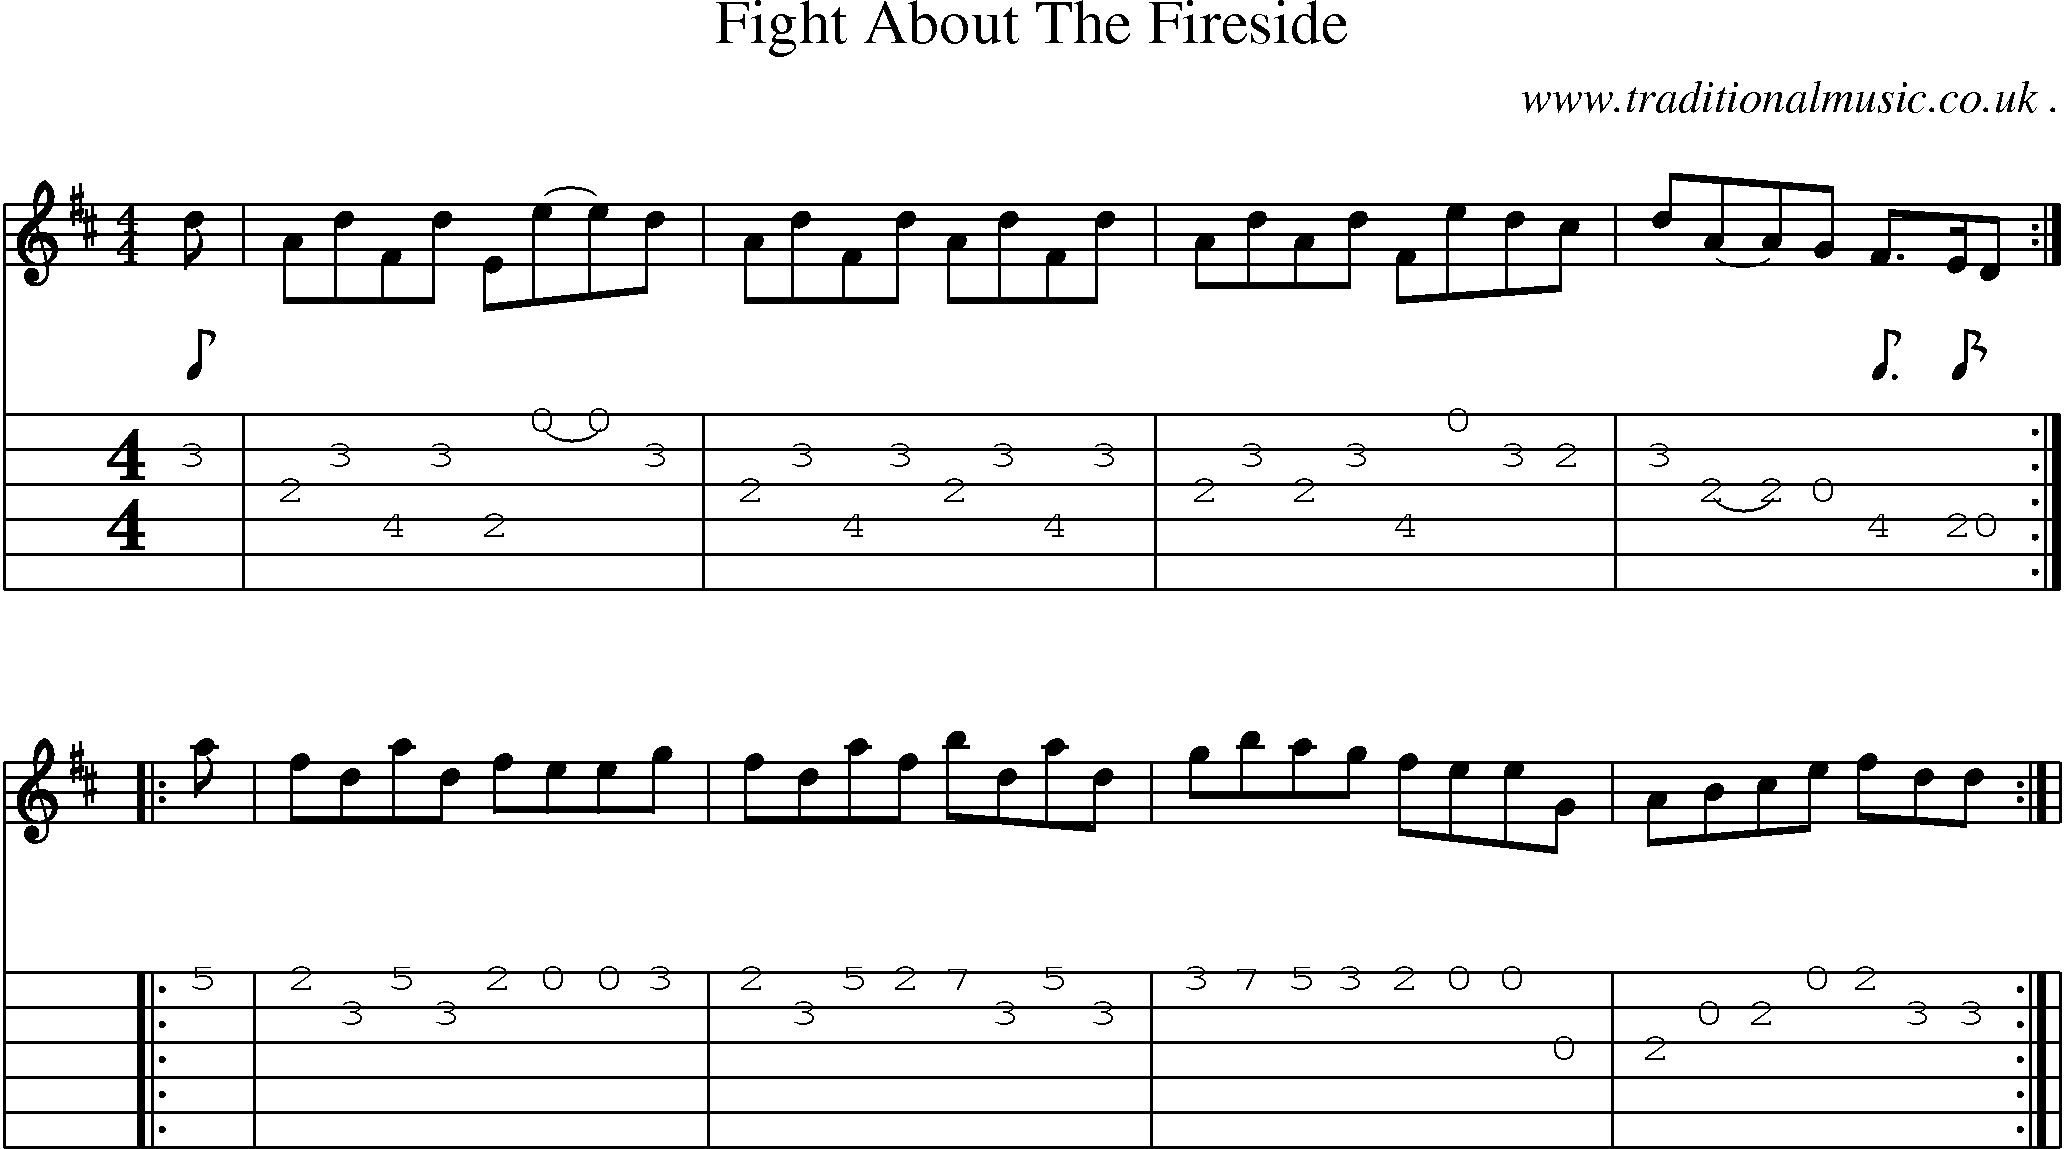 Sheet-Music and Guitar Tabs for Fight About The Fireside